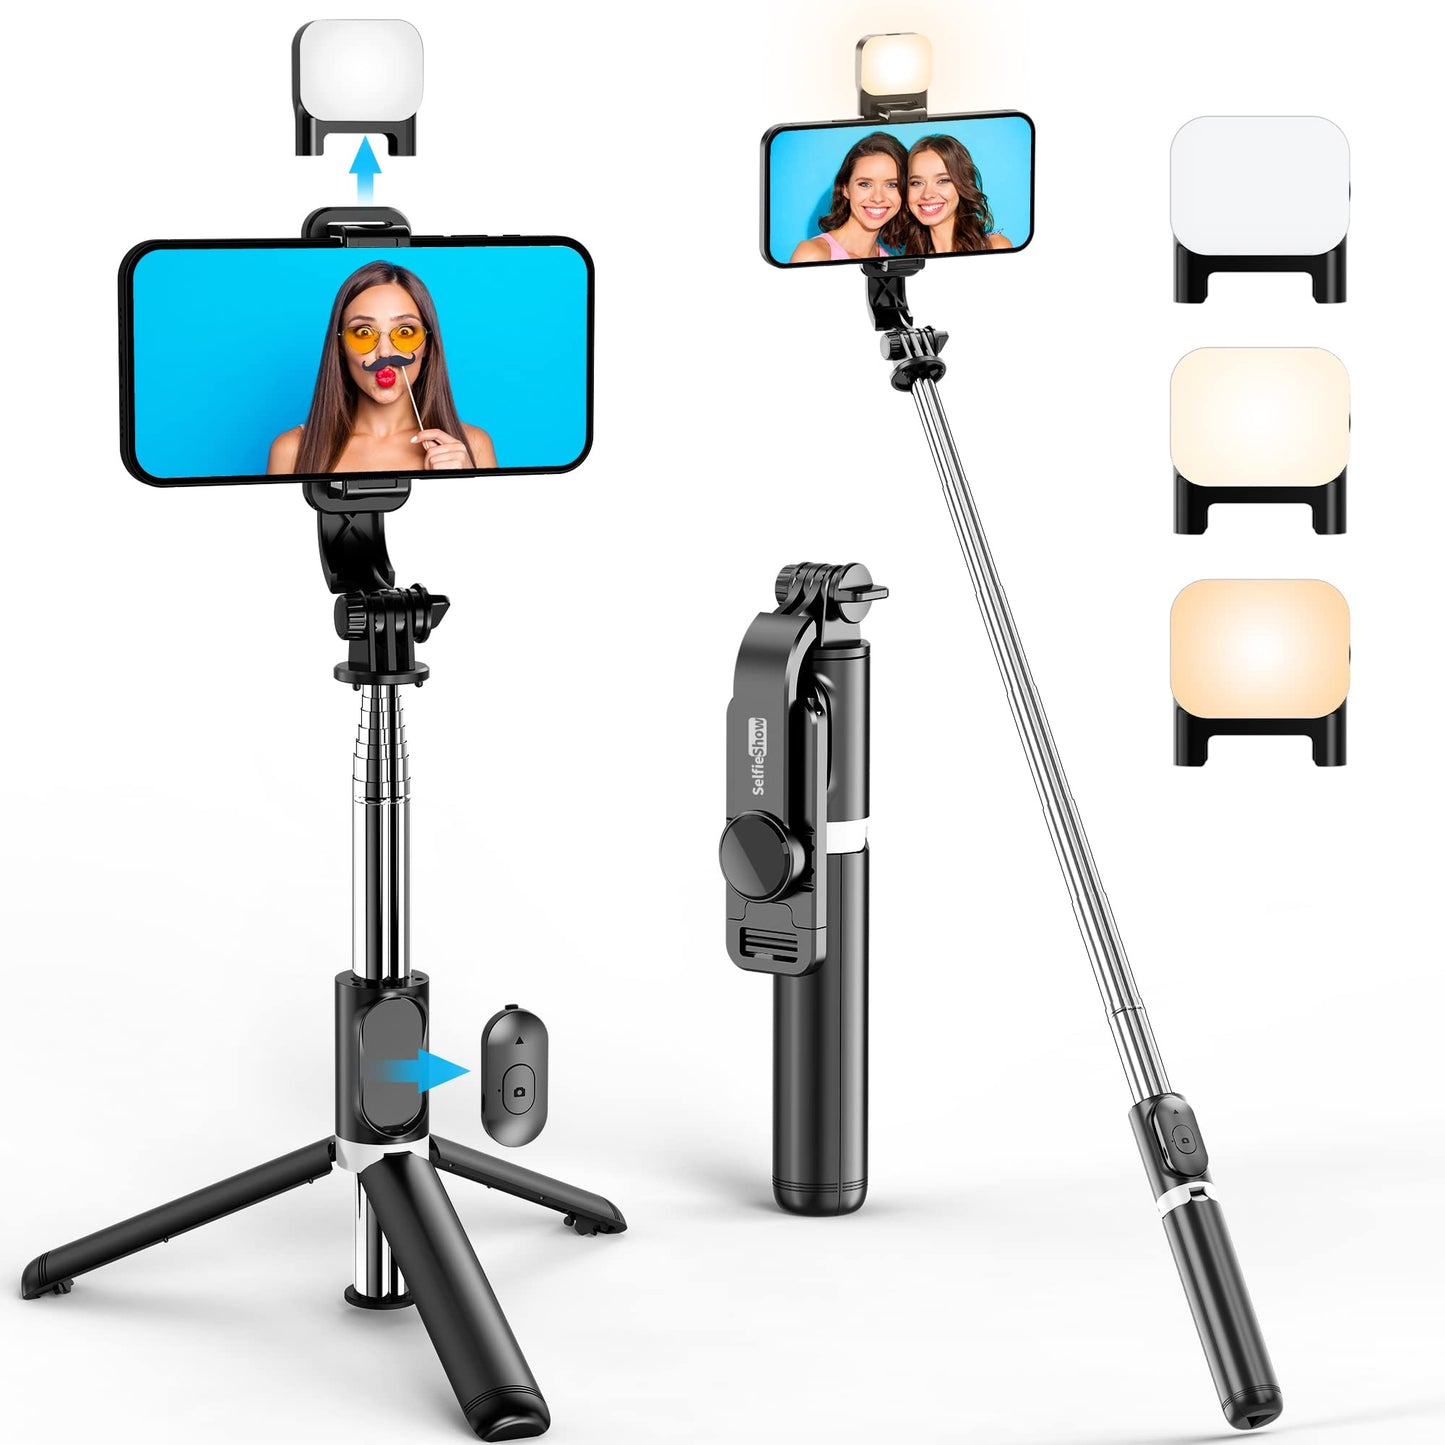 Selfie Stick Tripod, 4 in 1 Extendable Selfie Stick 360° Rotation Tripod Stand with Detachable Wireless Remote Portable Mobile Phone Holder Compatible with GoPro, iPhone, Android Smartphone